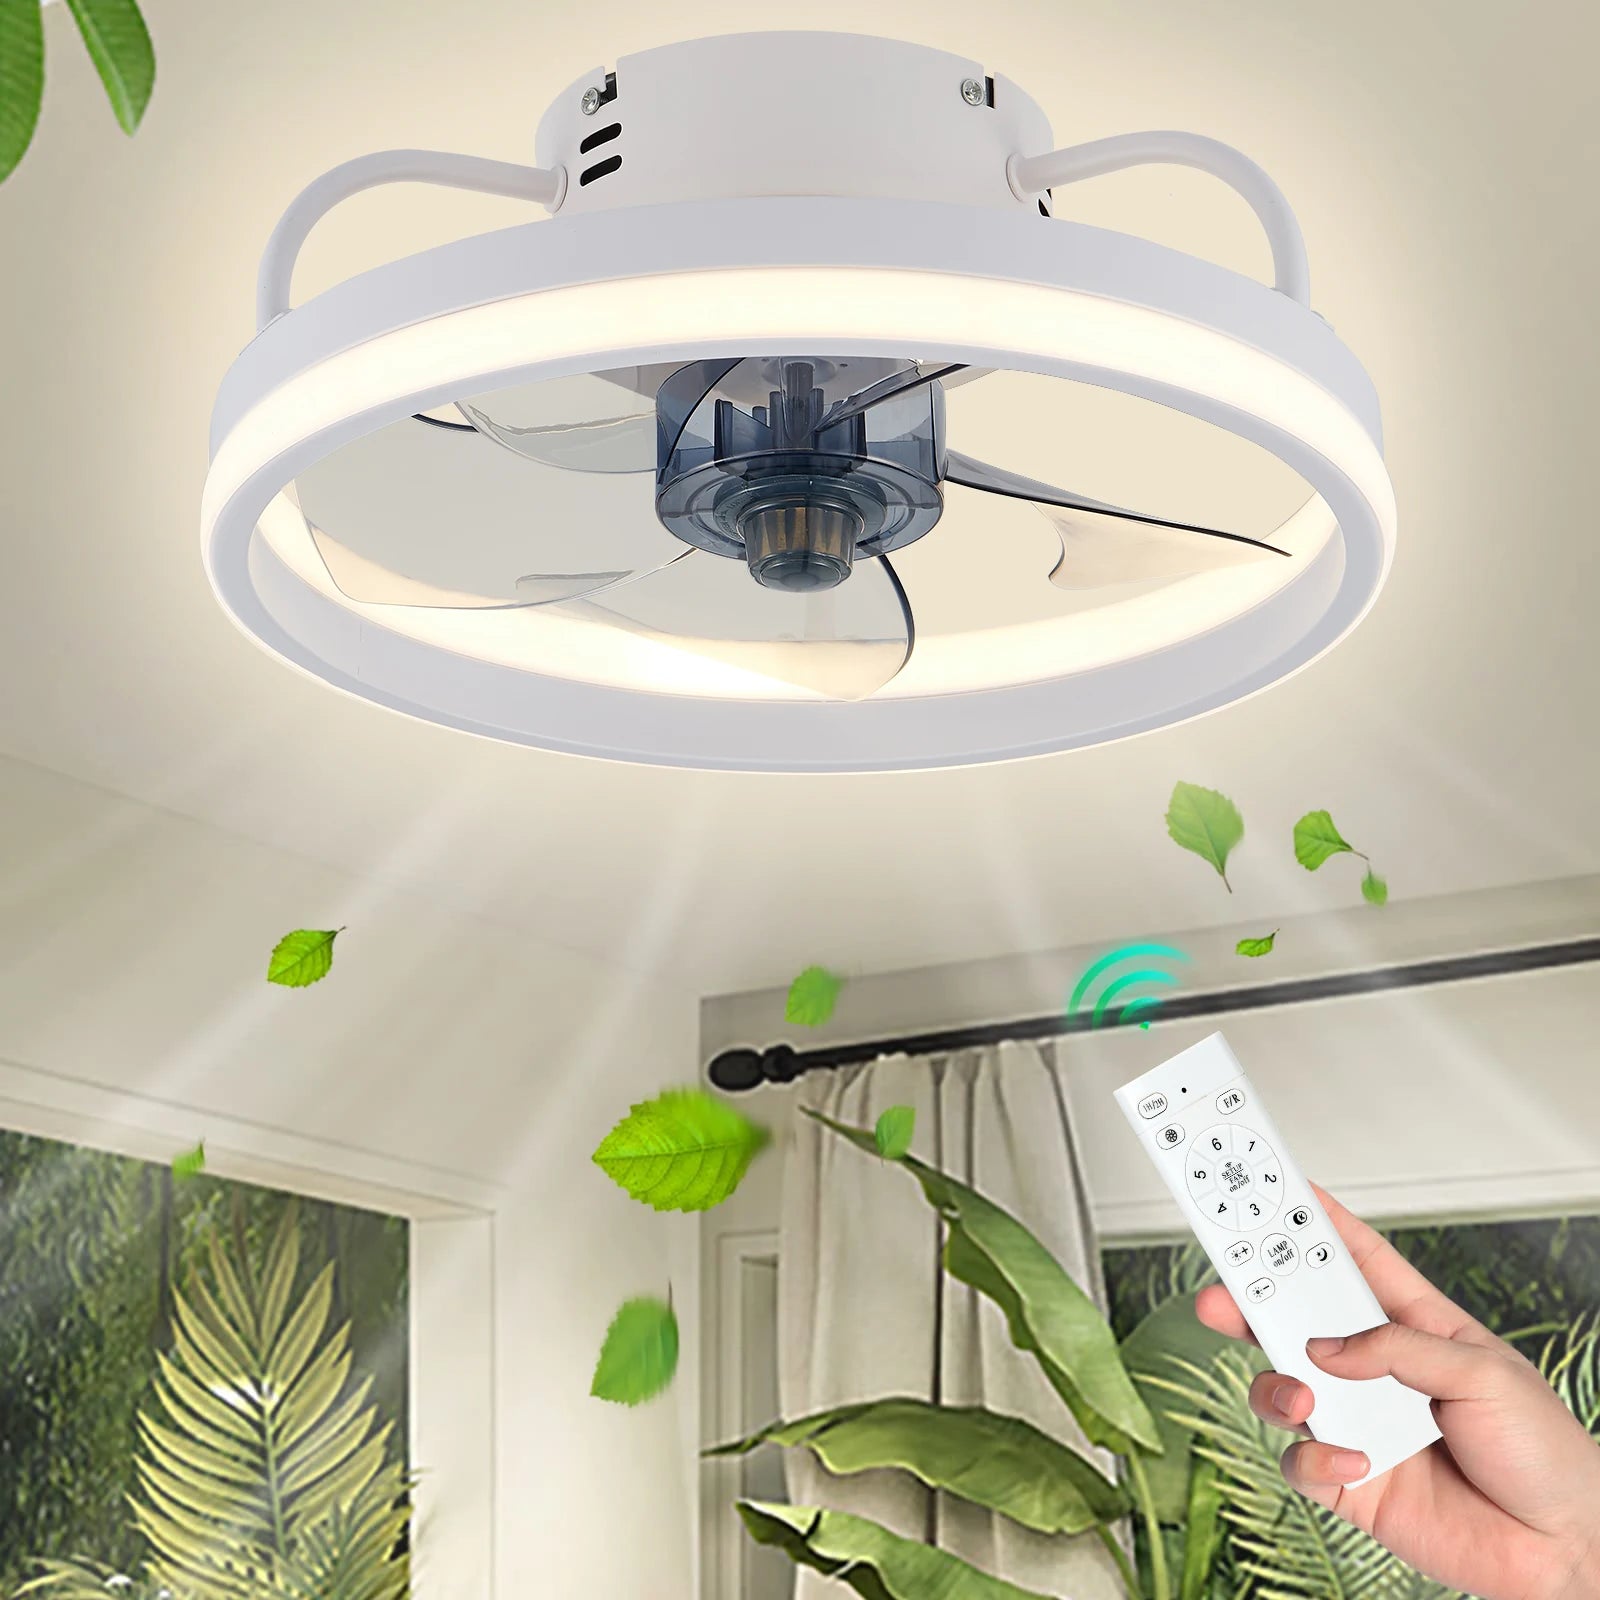 55W Smart Ceiling Fan with Lights, Remote Control, and Invisible Blades - Bedroom Decor Ventilator Lamp (33cm)